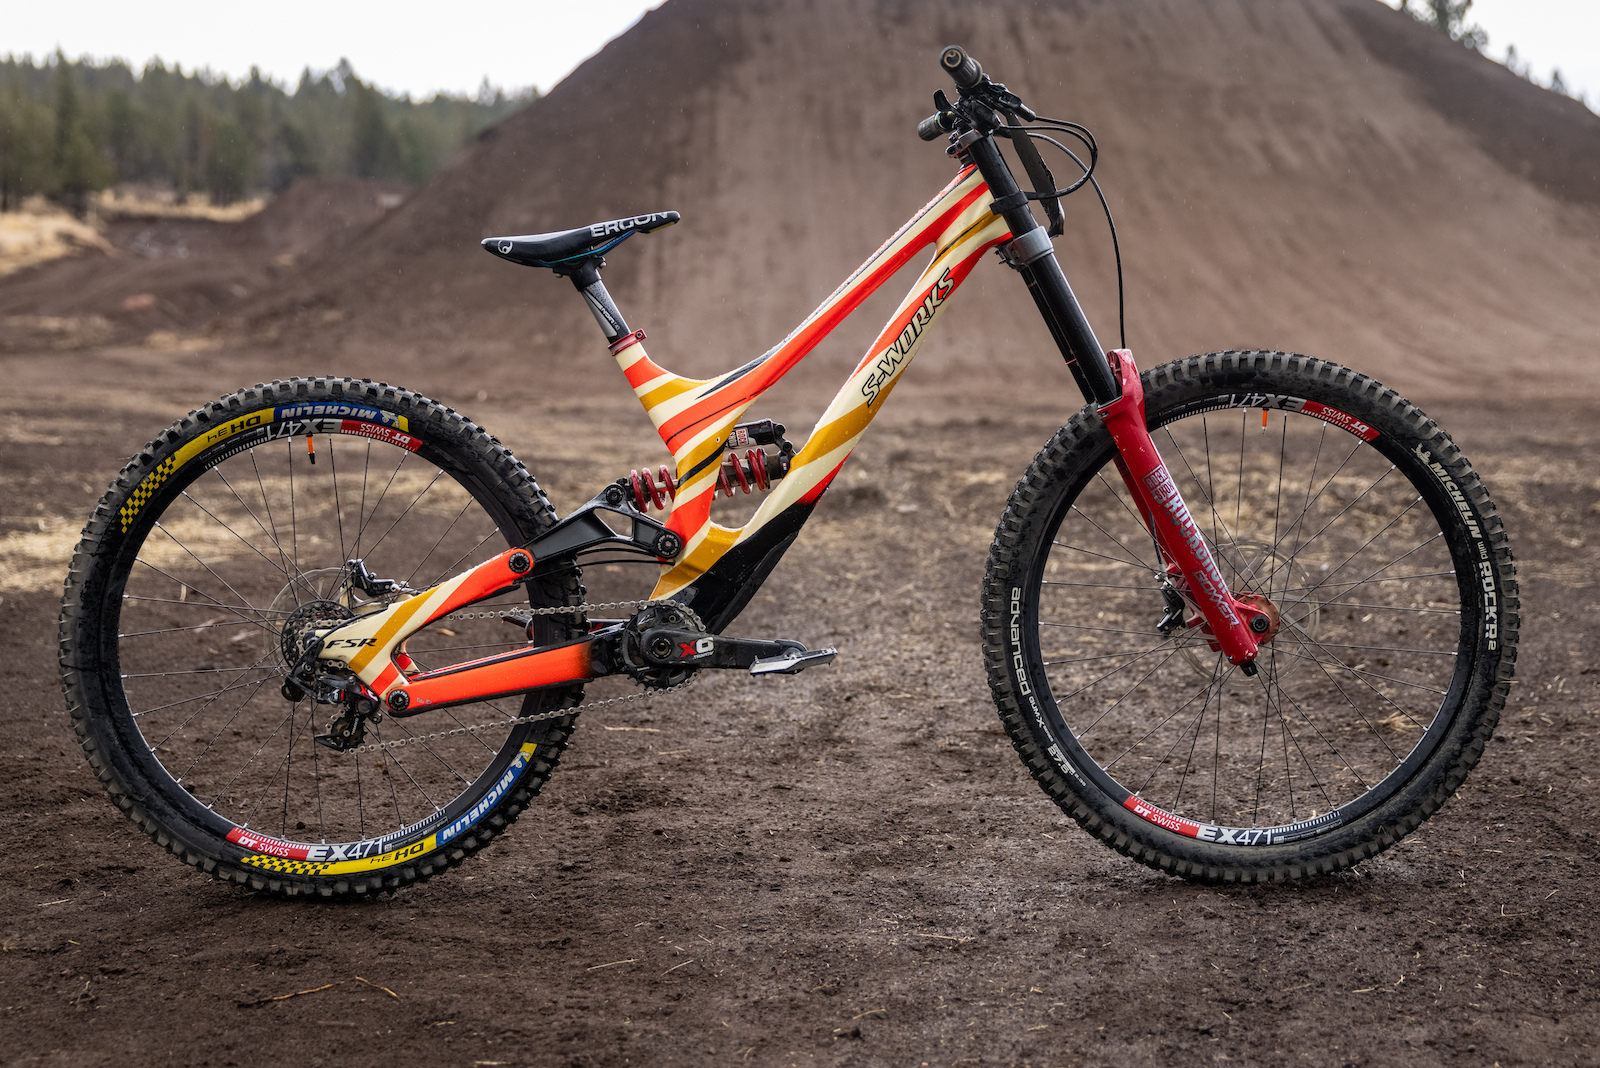 Cortar célula Nutrición 17 Freeride Bikes from Proving Grounds 2021 - Pinkbike